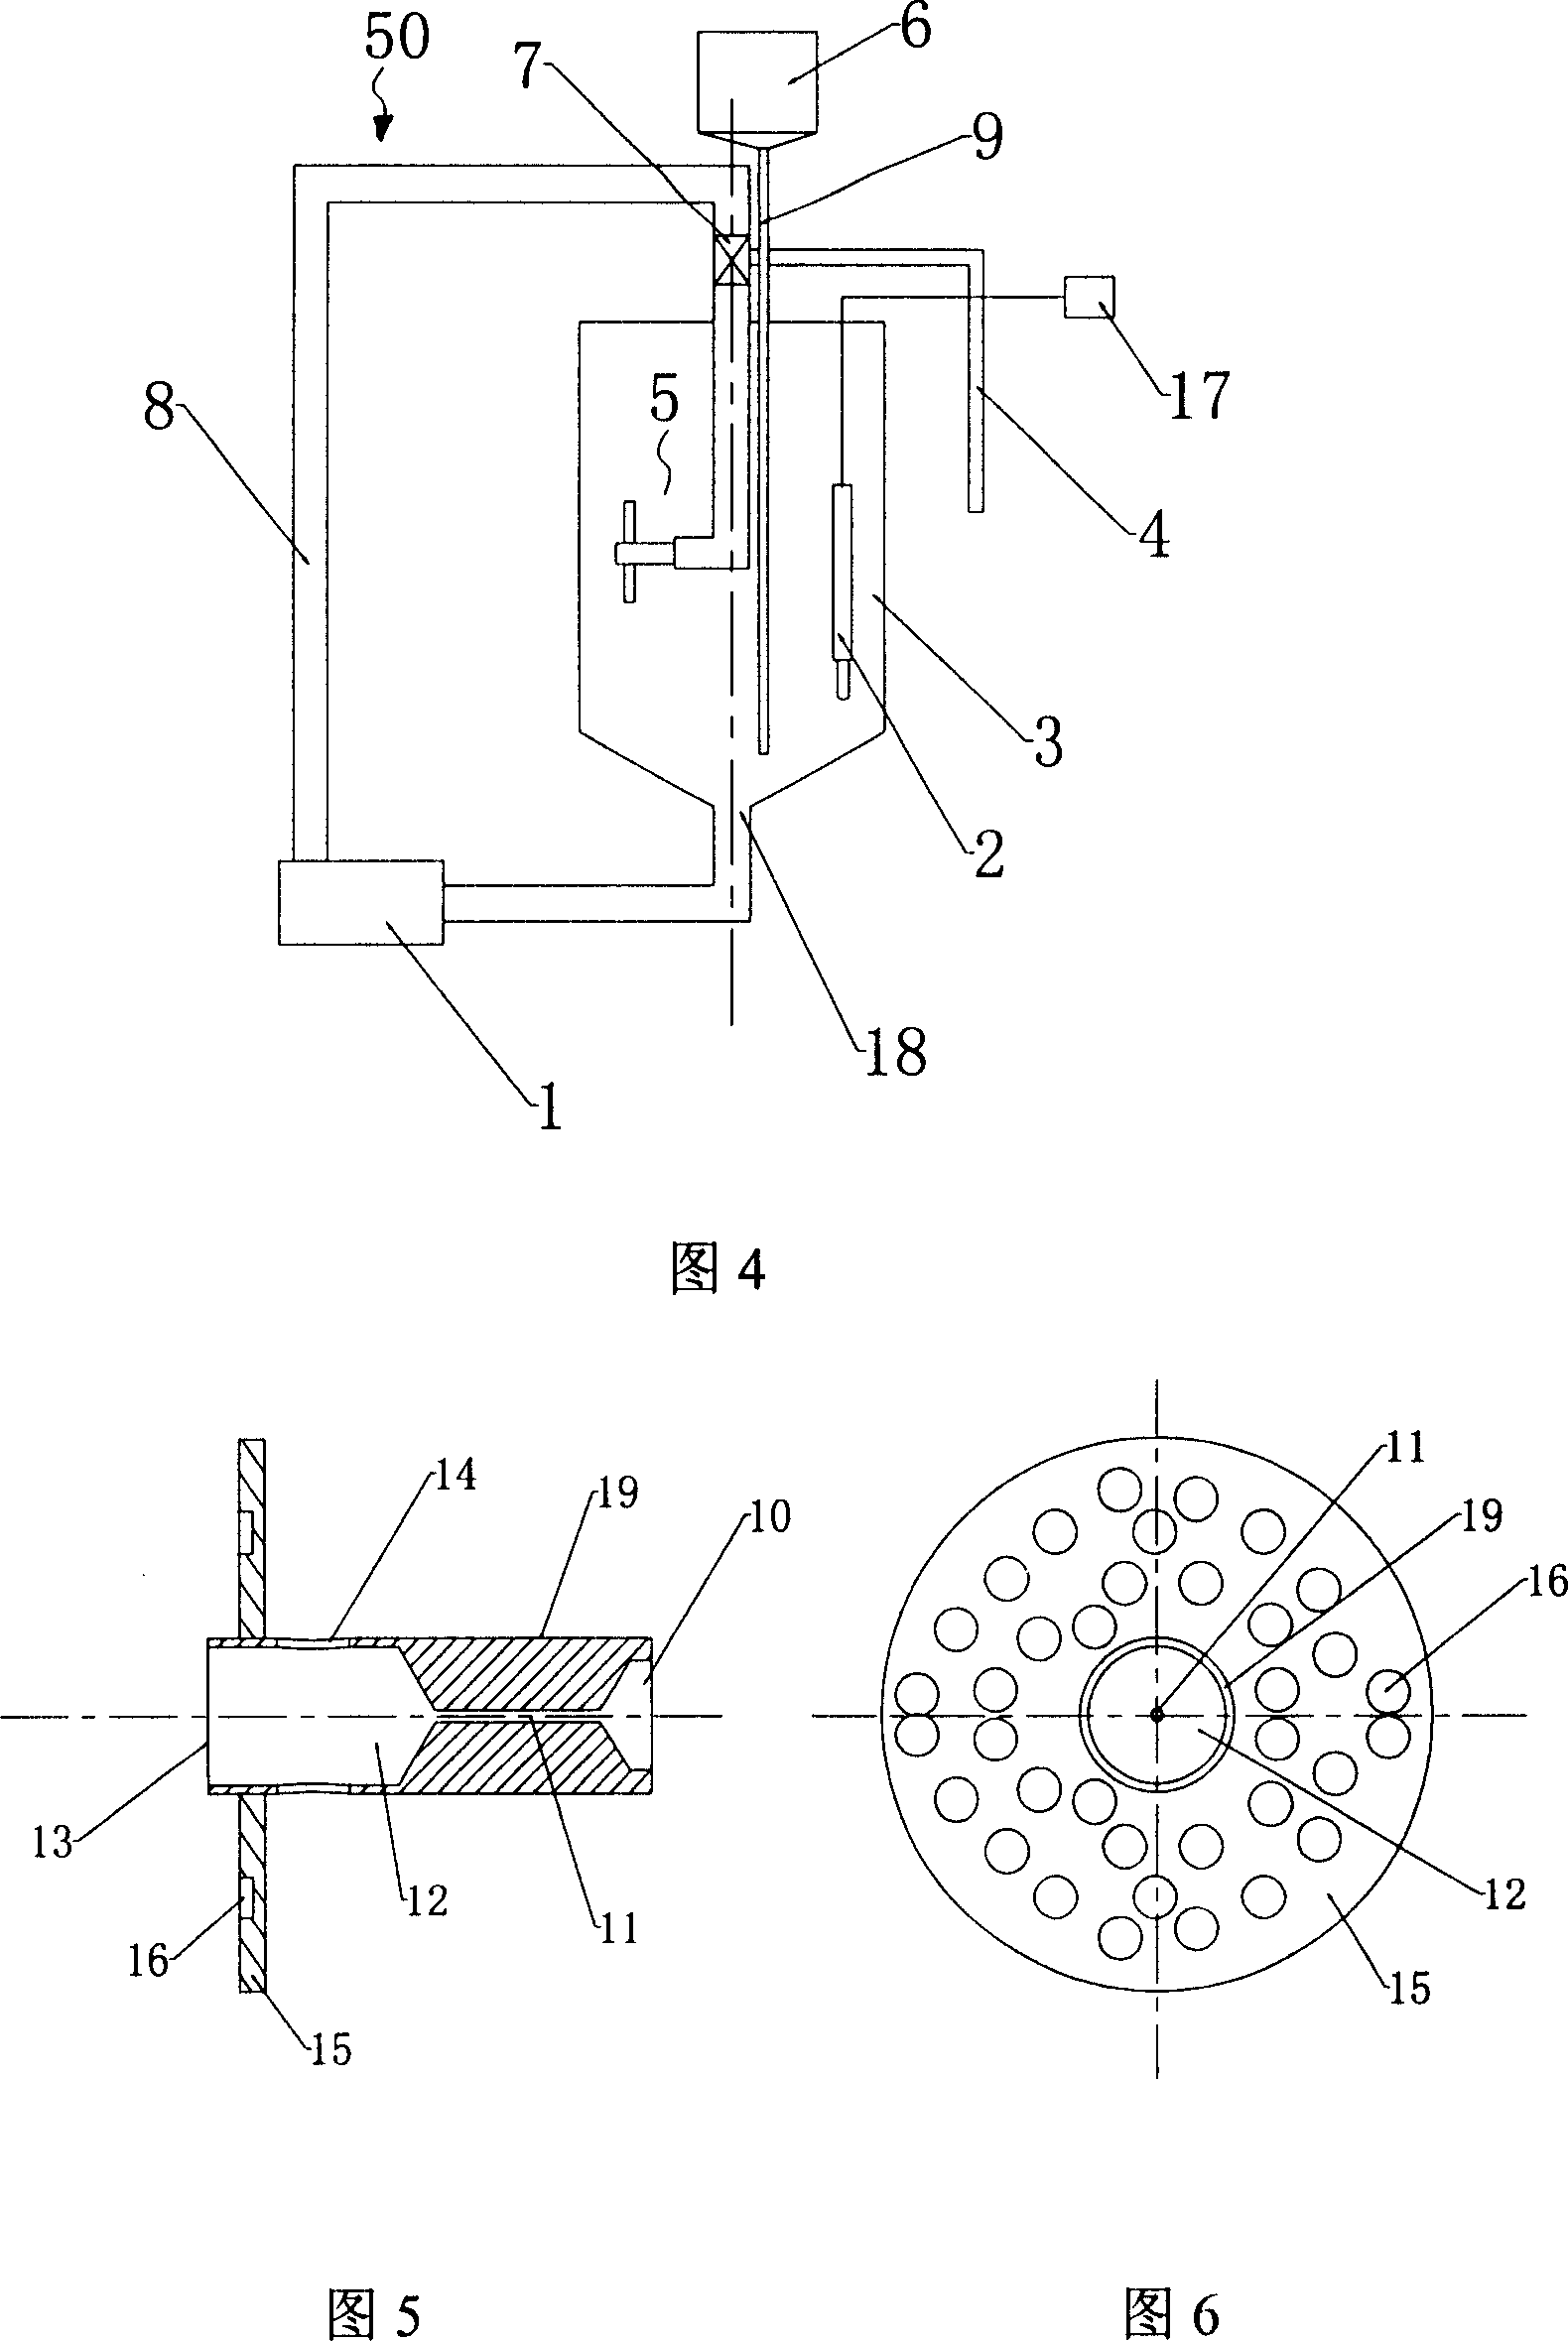 Treatment recovery method for monocrystalline silicon cutting waste liquor